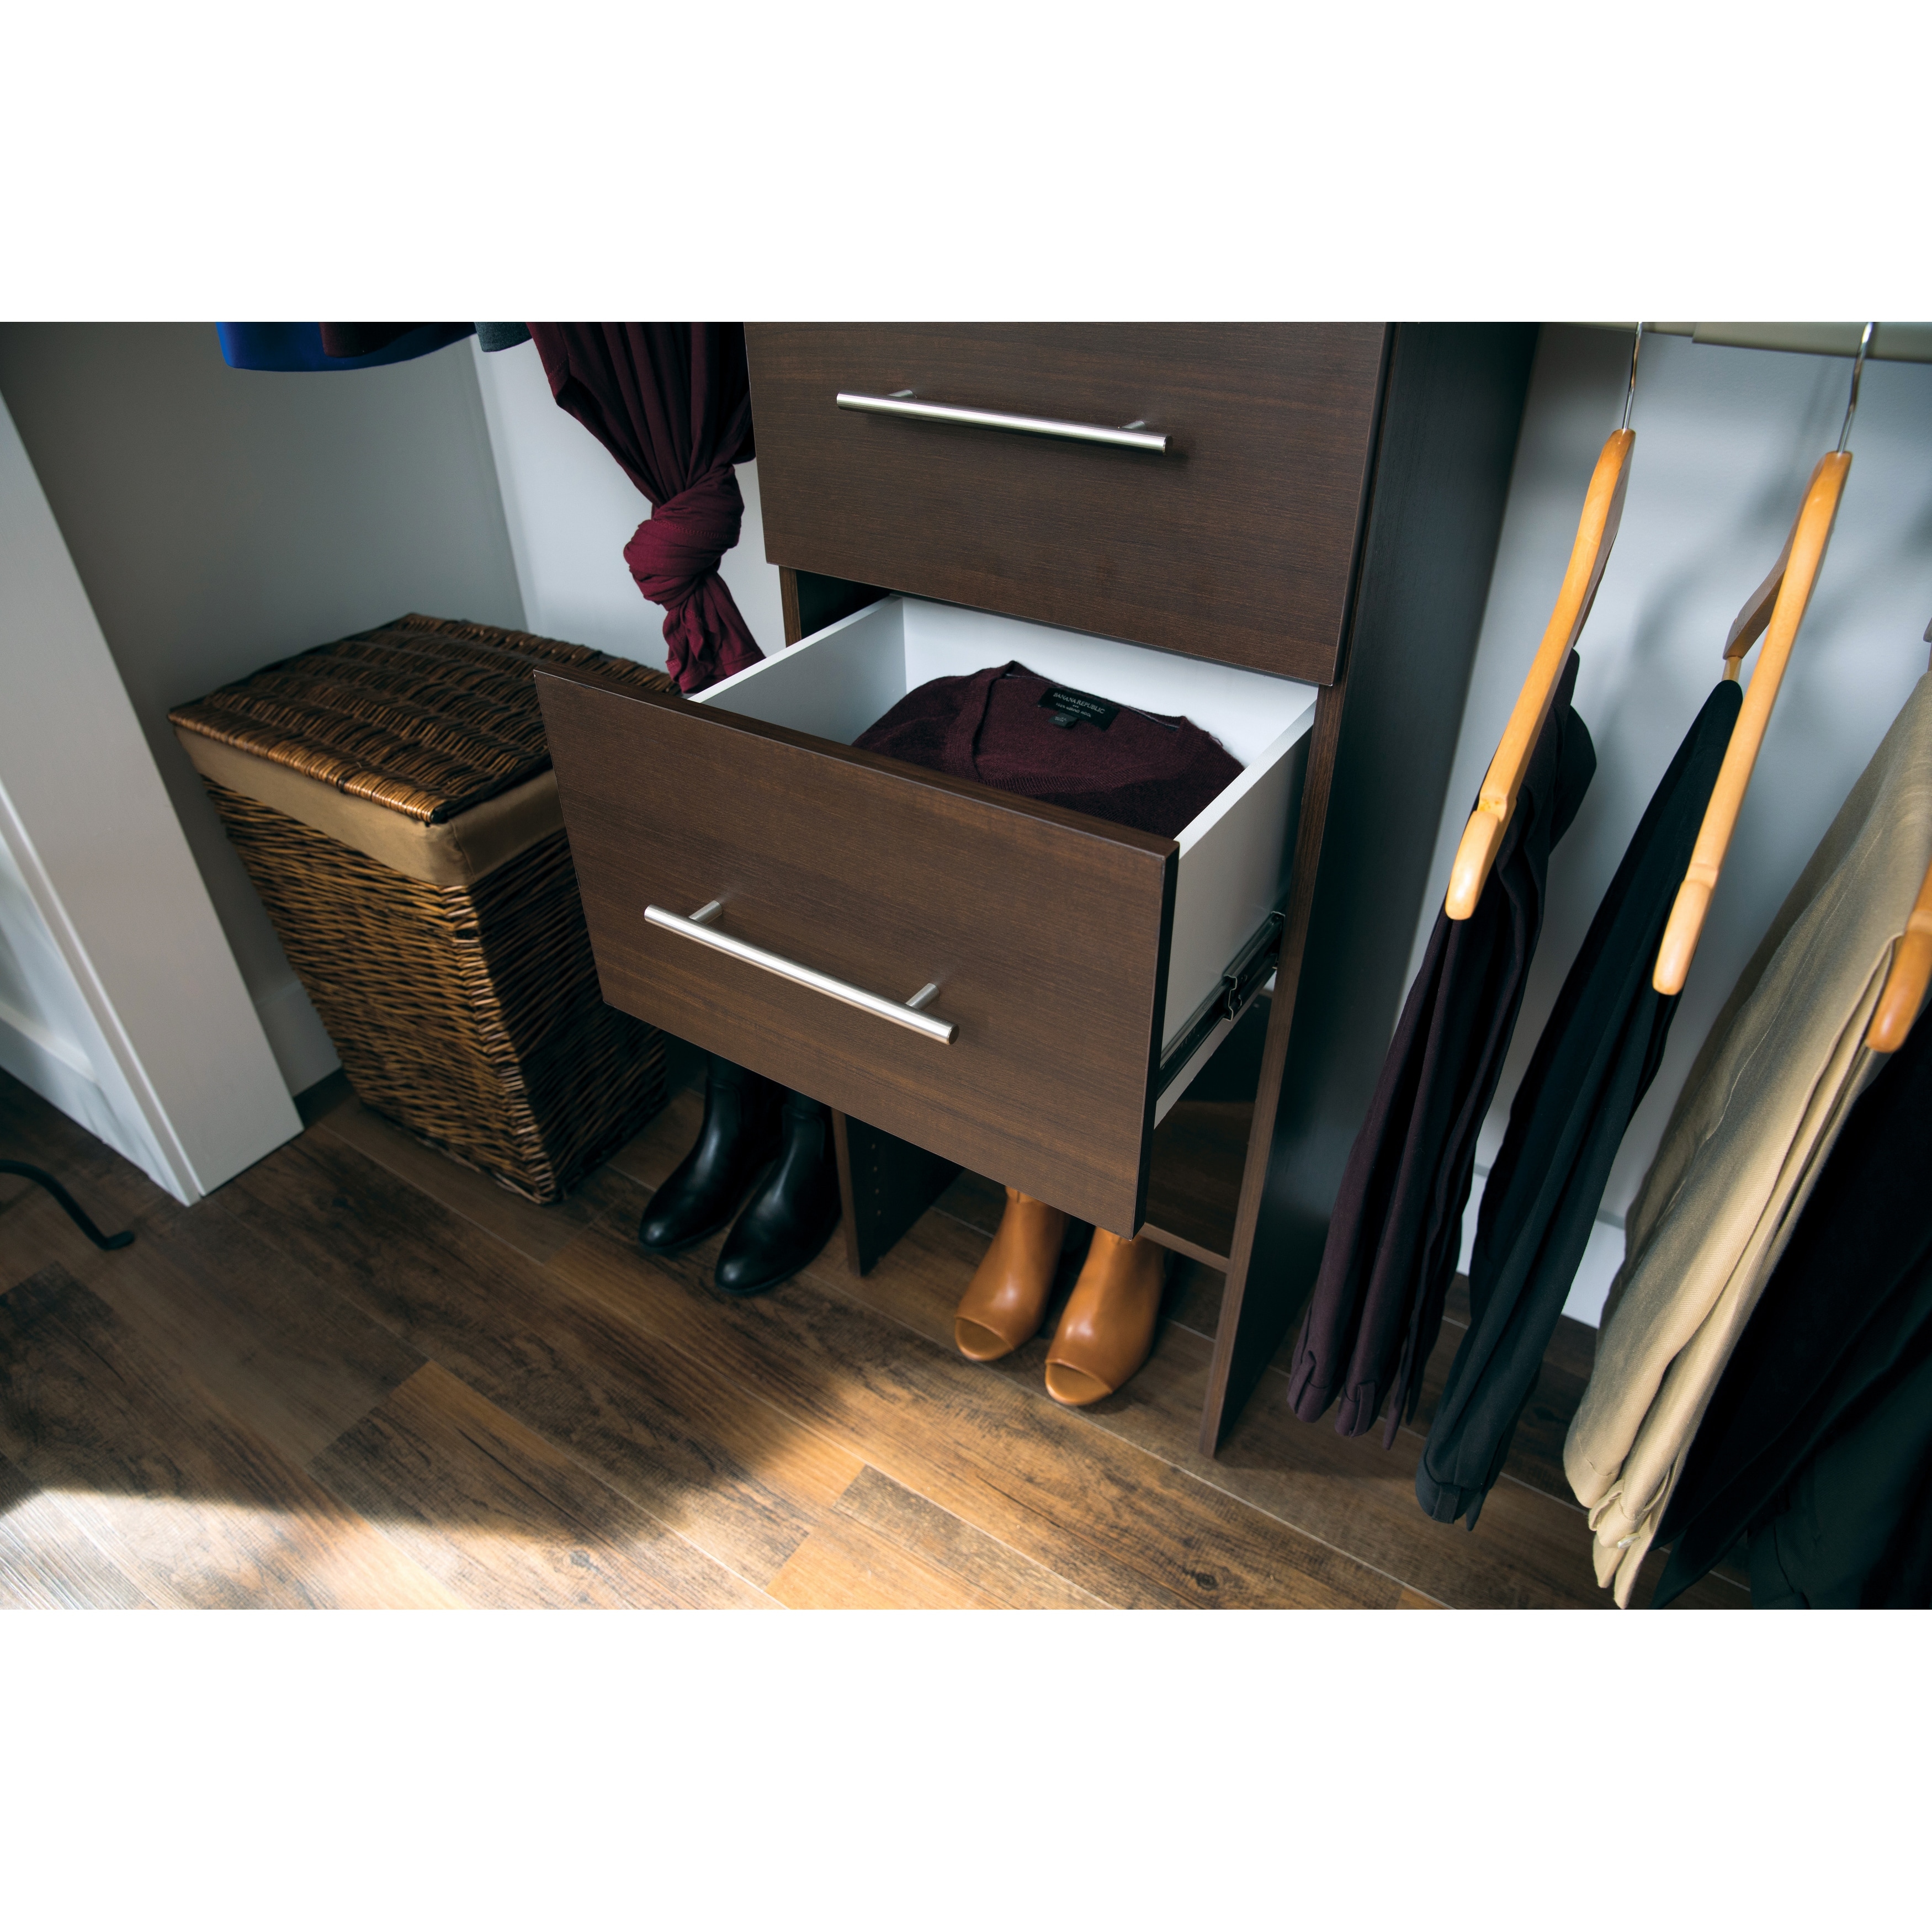 ClosetMaid SuiteSymphony 25 in. Closet Organizer with 3 Drawers - On Sale -  Bed Bath & Beyond - 26435942